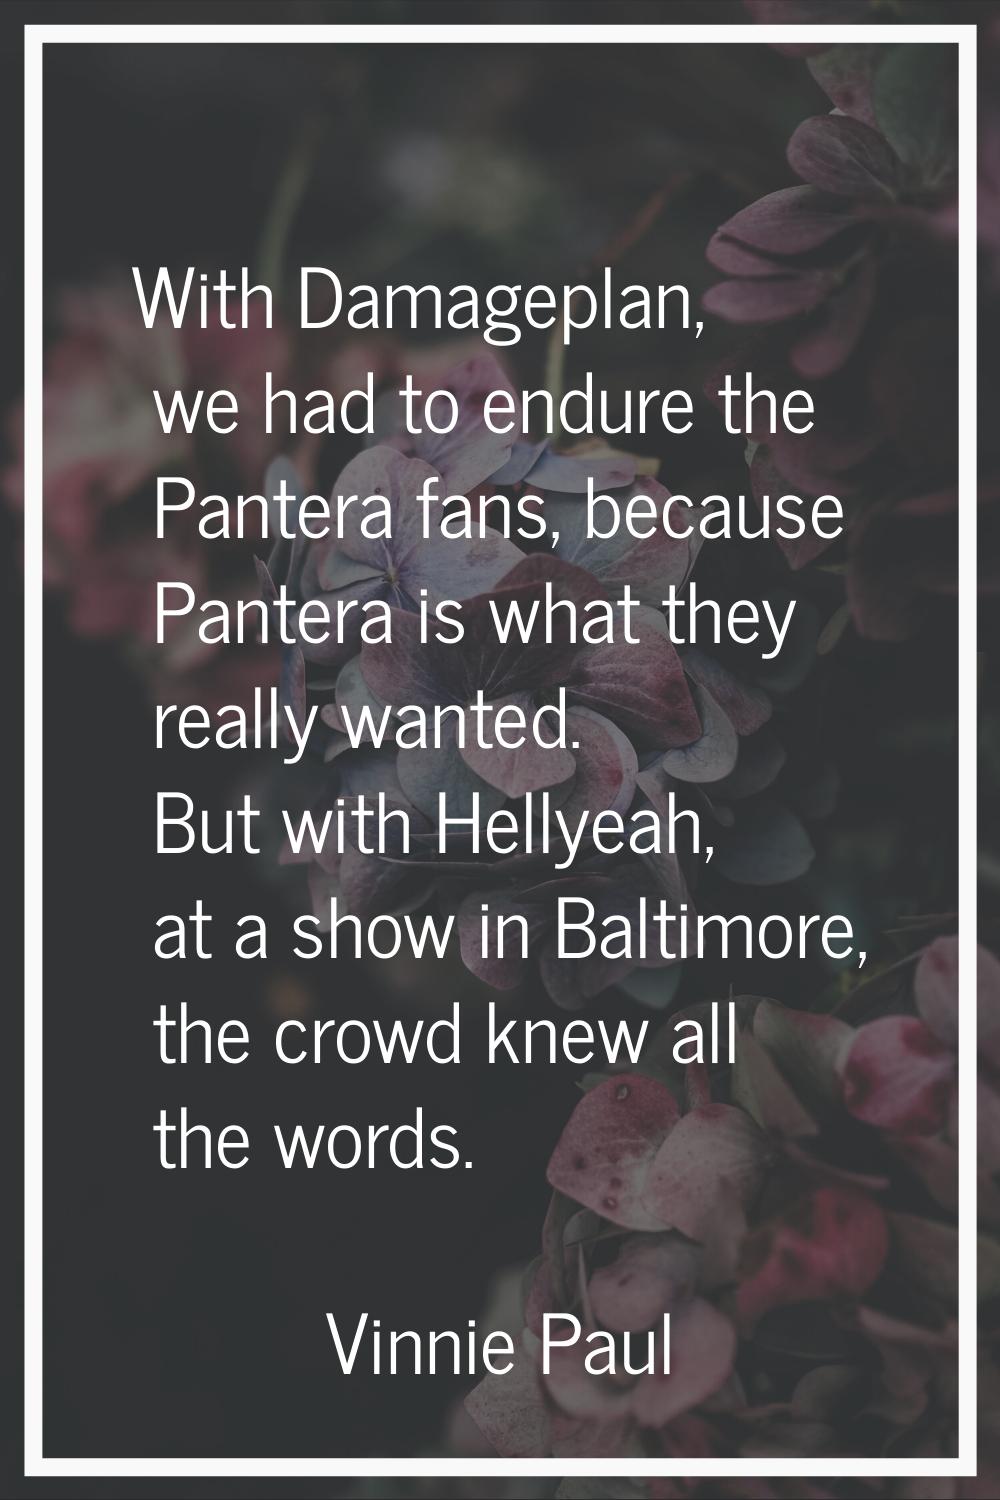 With Damageplan, we had to endure the Pantera fans, because Pantera is what they really wanted. But